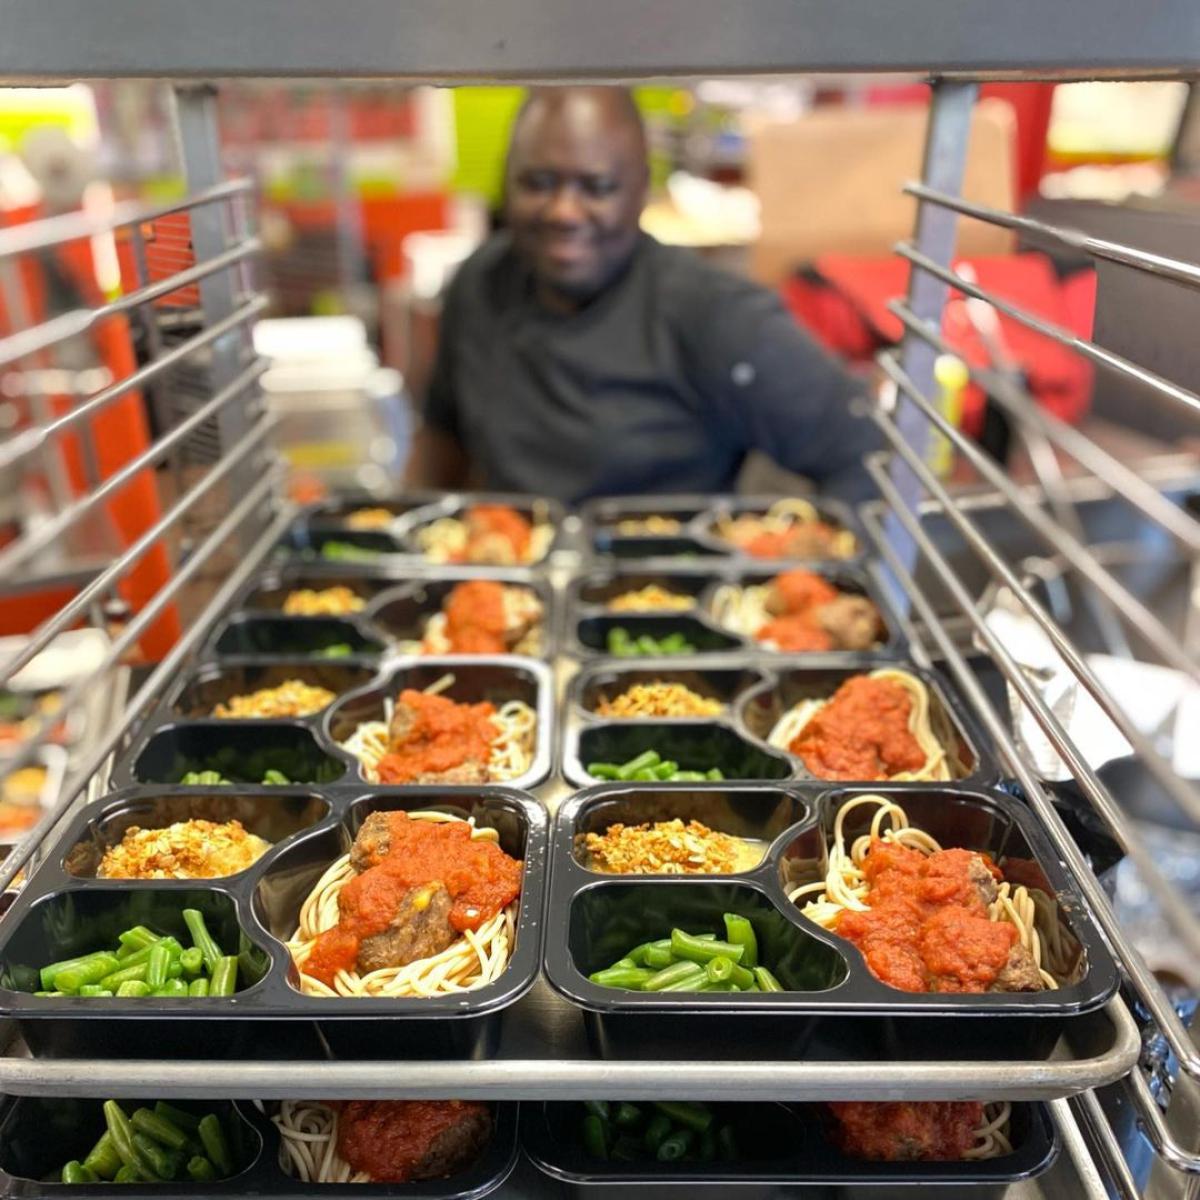 A cart is stacked full of trays of school meals - spaghetti and meatballs, green beans, and apple sauce. A chef smiles in the background.